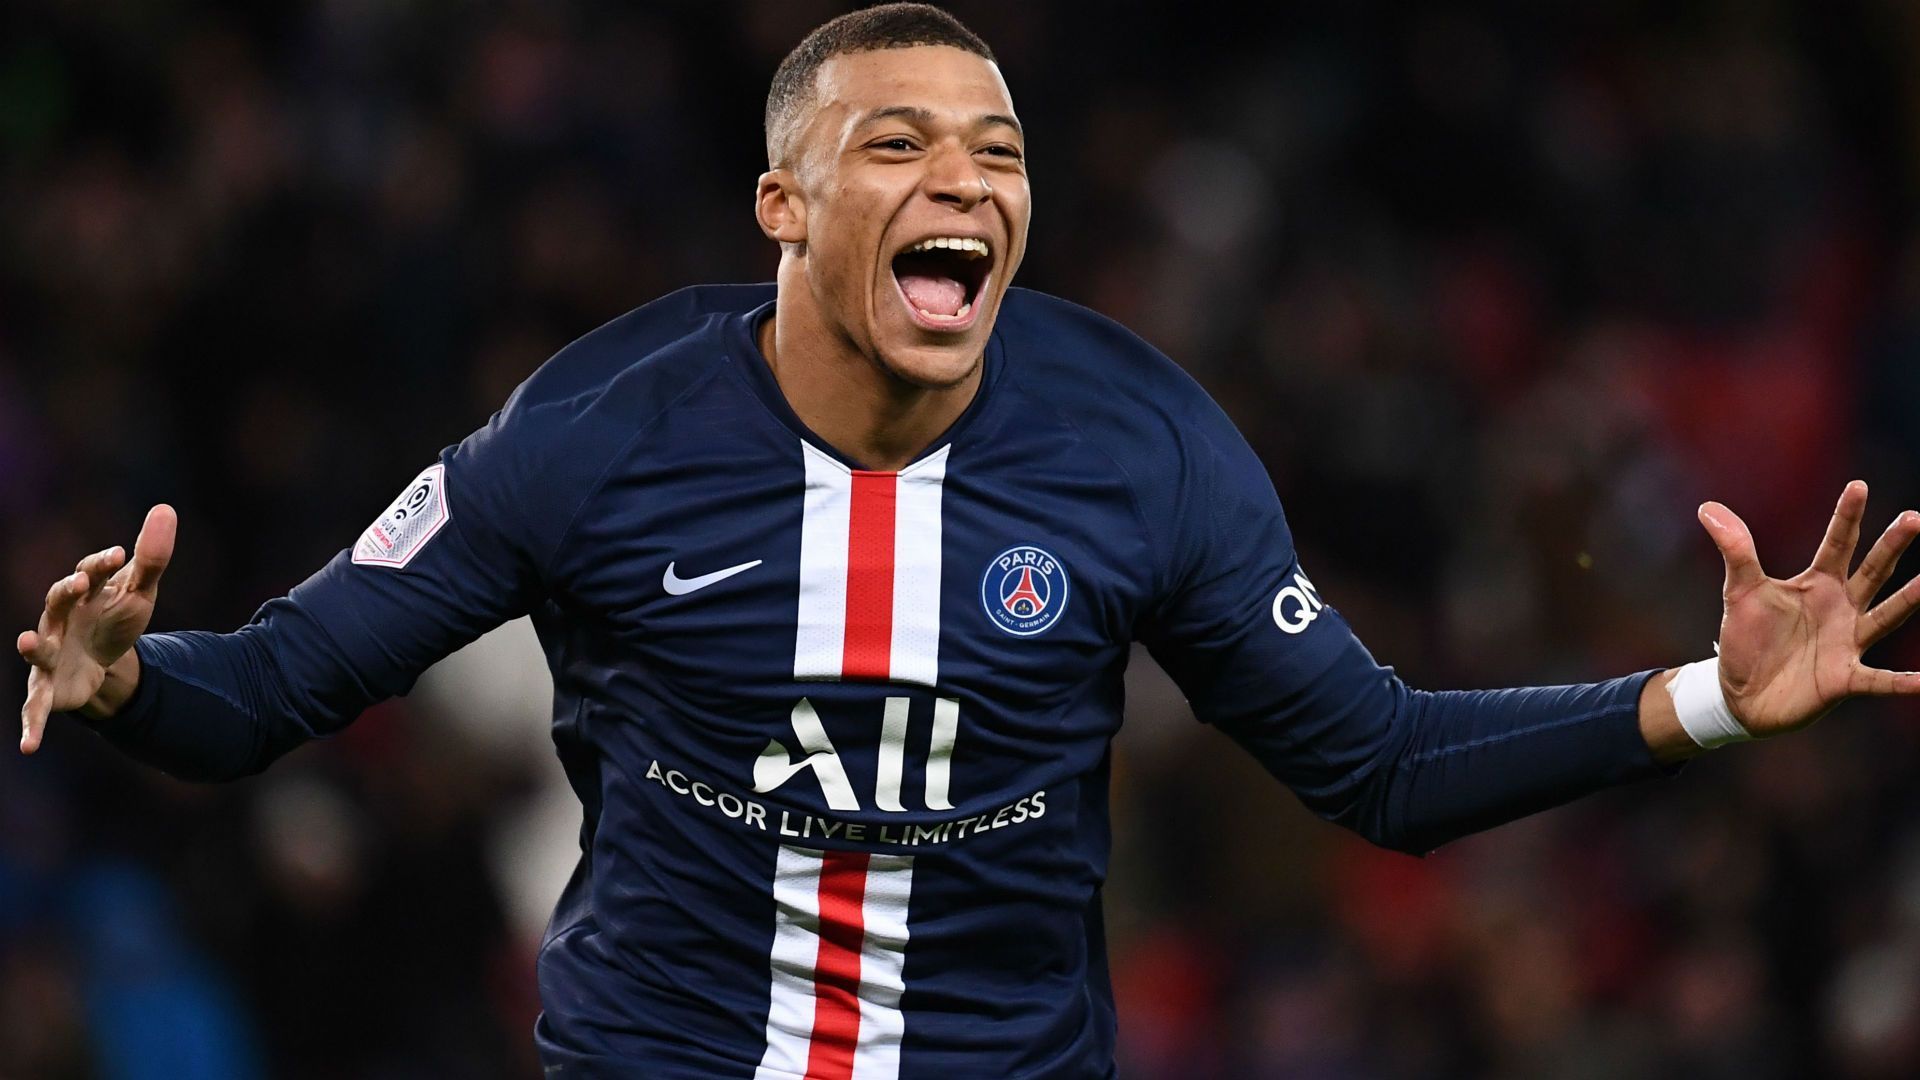 Kylian Mbappe has emerged as one of the most exciting players in world football.